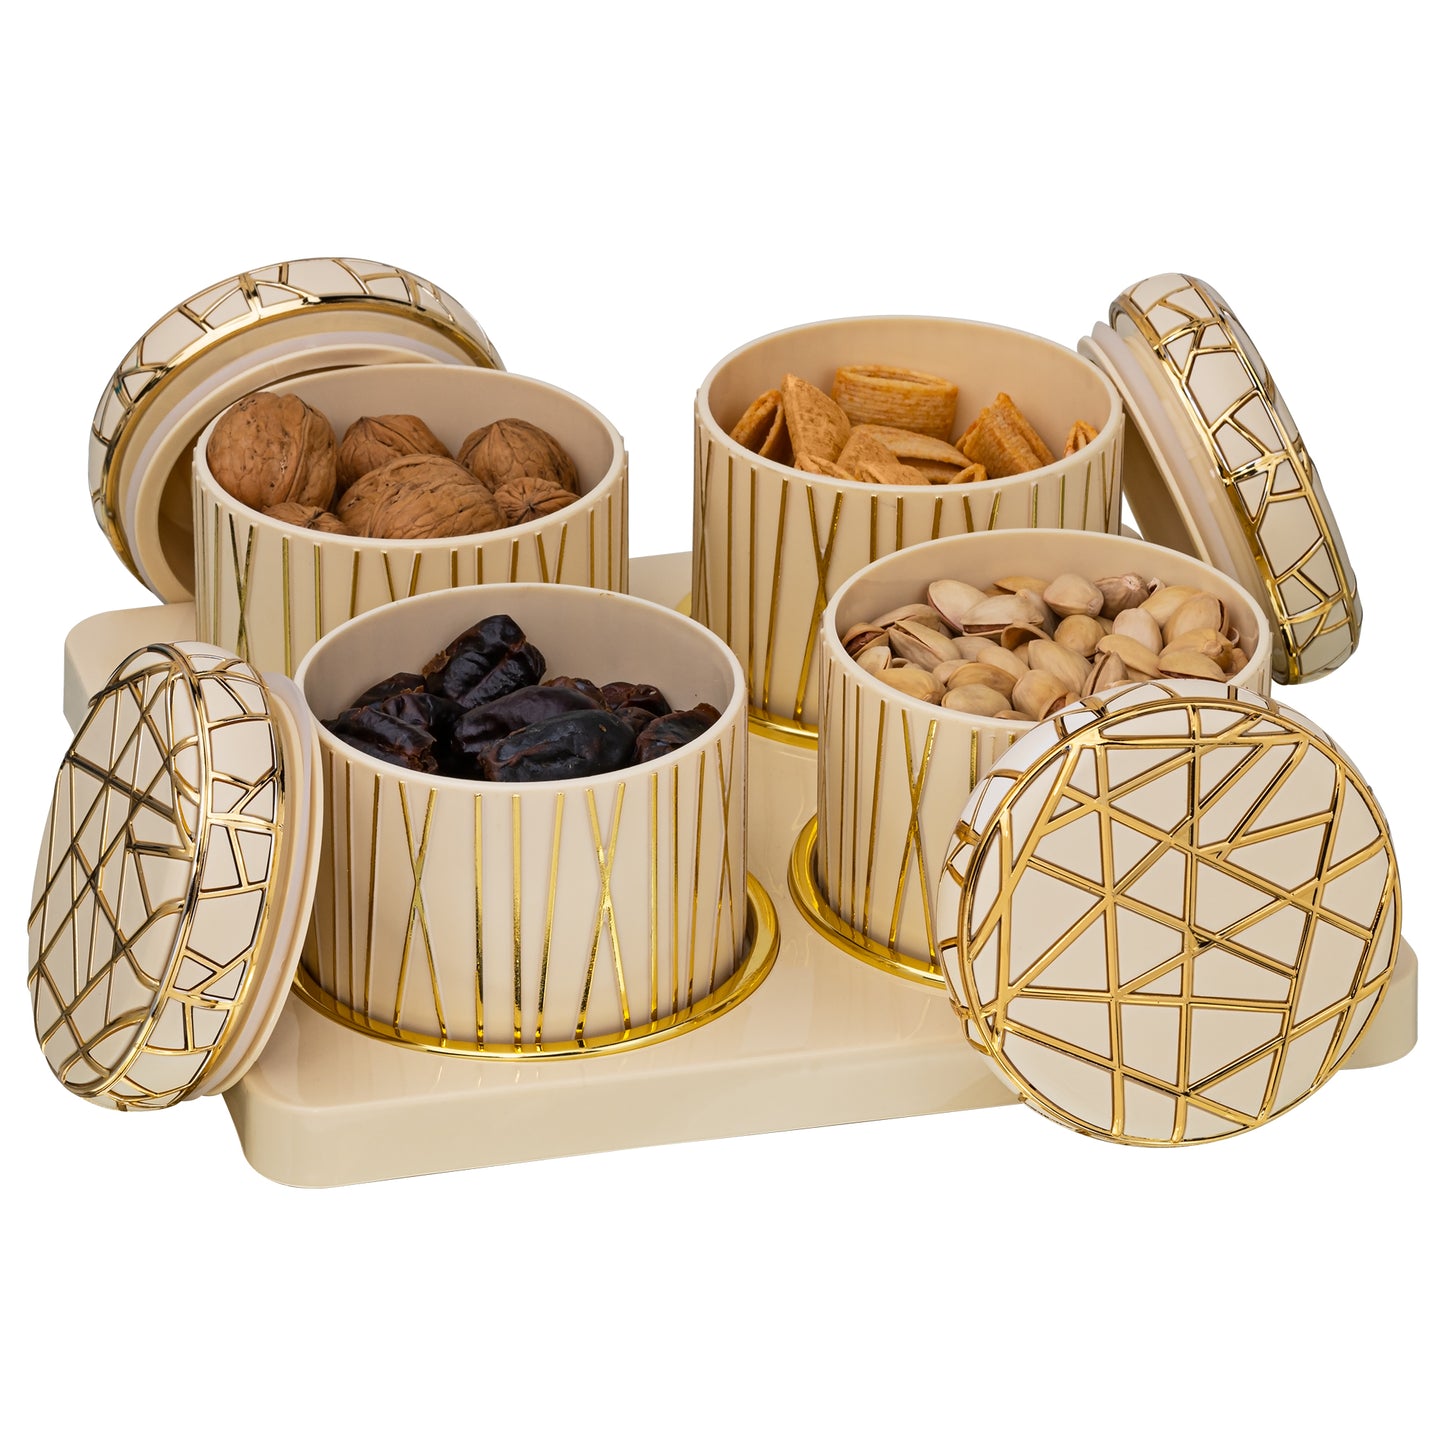 SELVEL Royal Linex Airtight Dry Fruit Container Tray Set - 4 Pieces (450ml), Ivory Polypropylene with Luxurious Gold Foil Embellishments